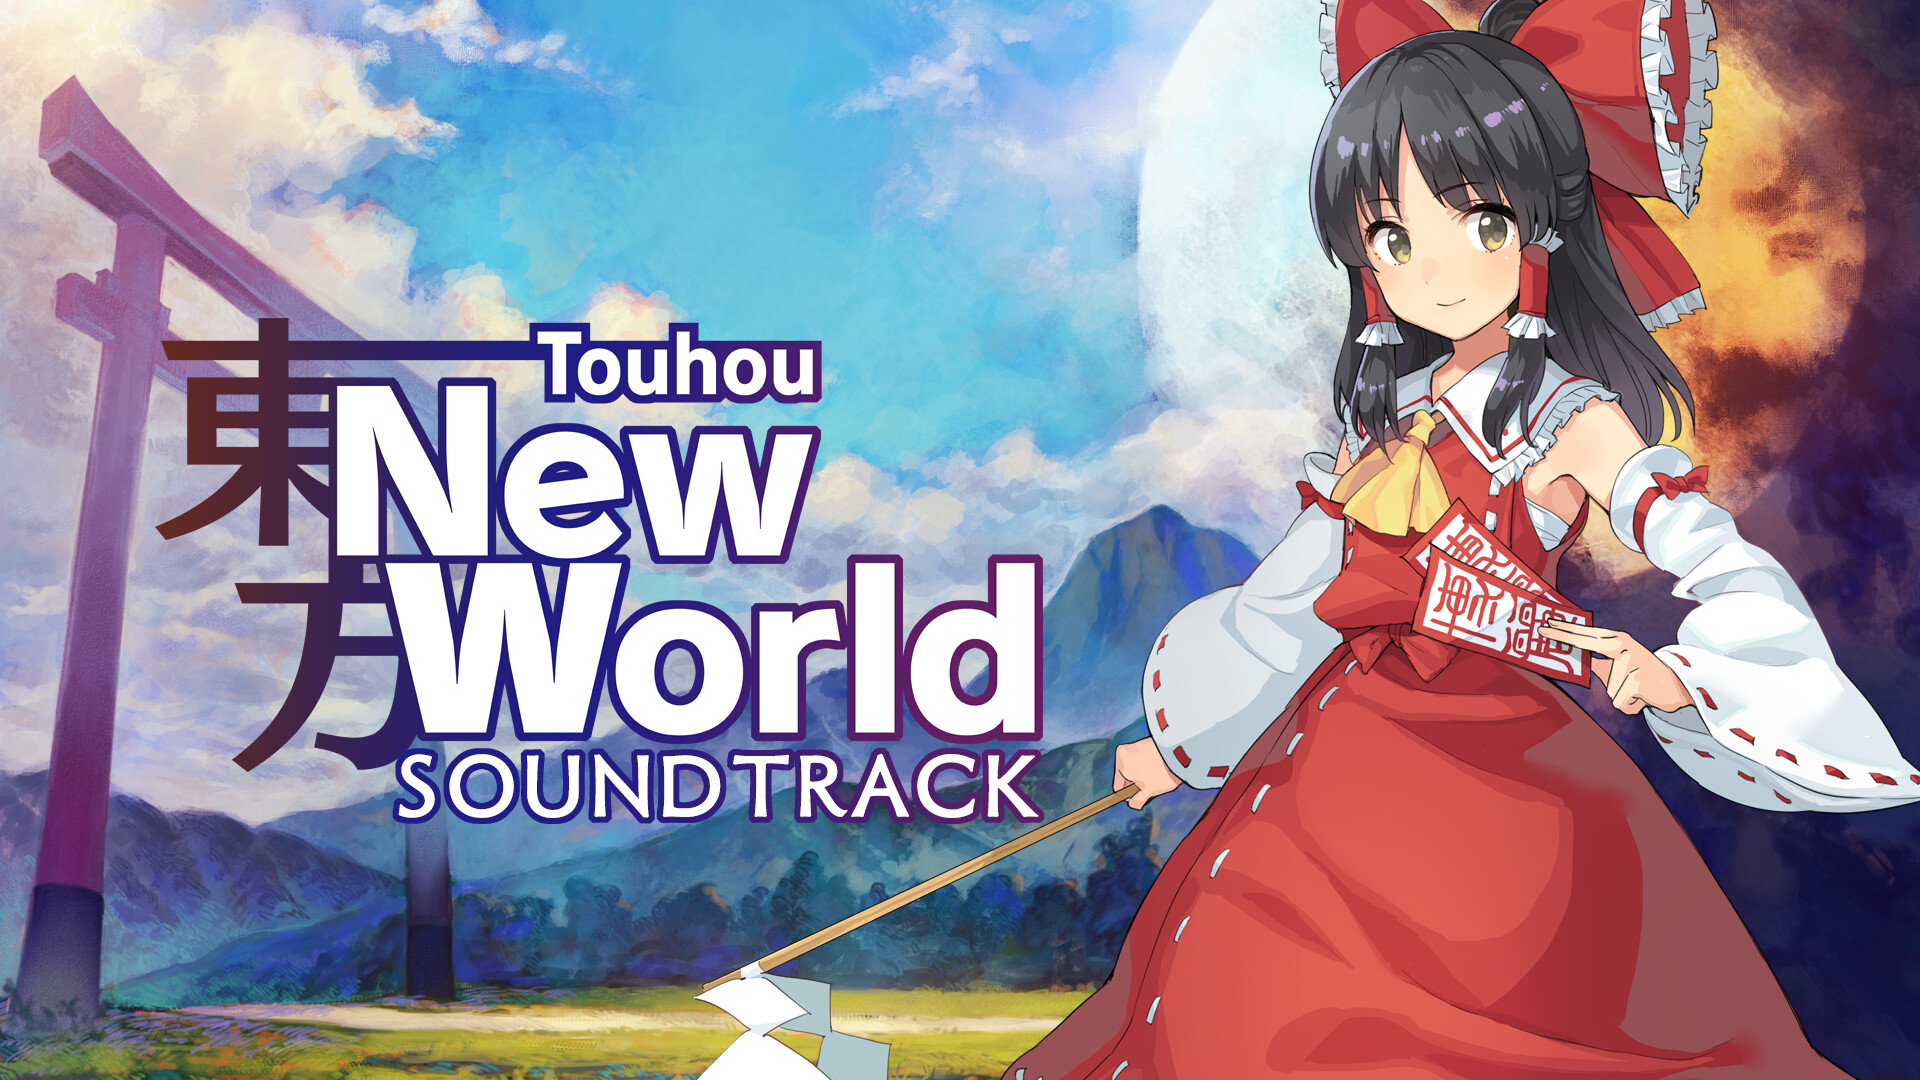 Touhou: New World on Steam